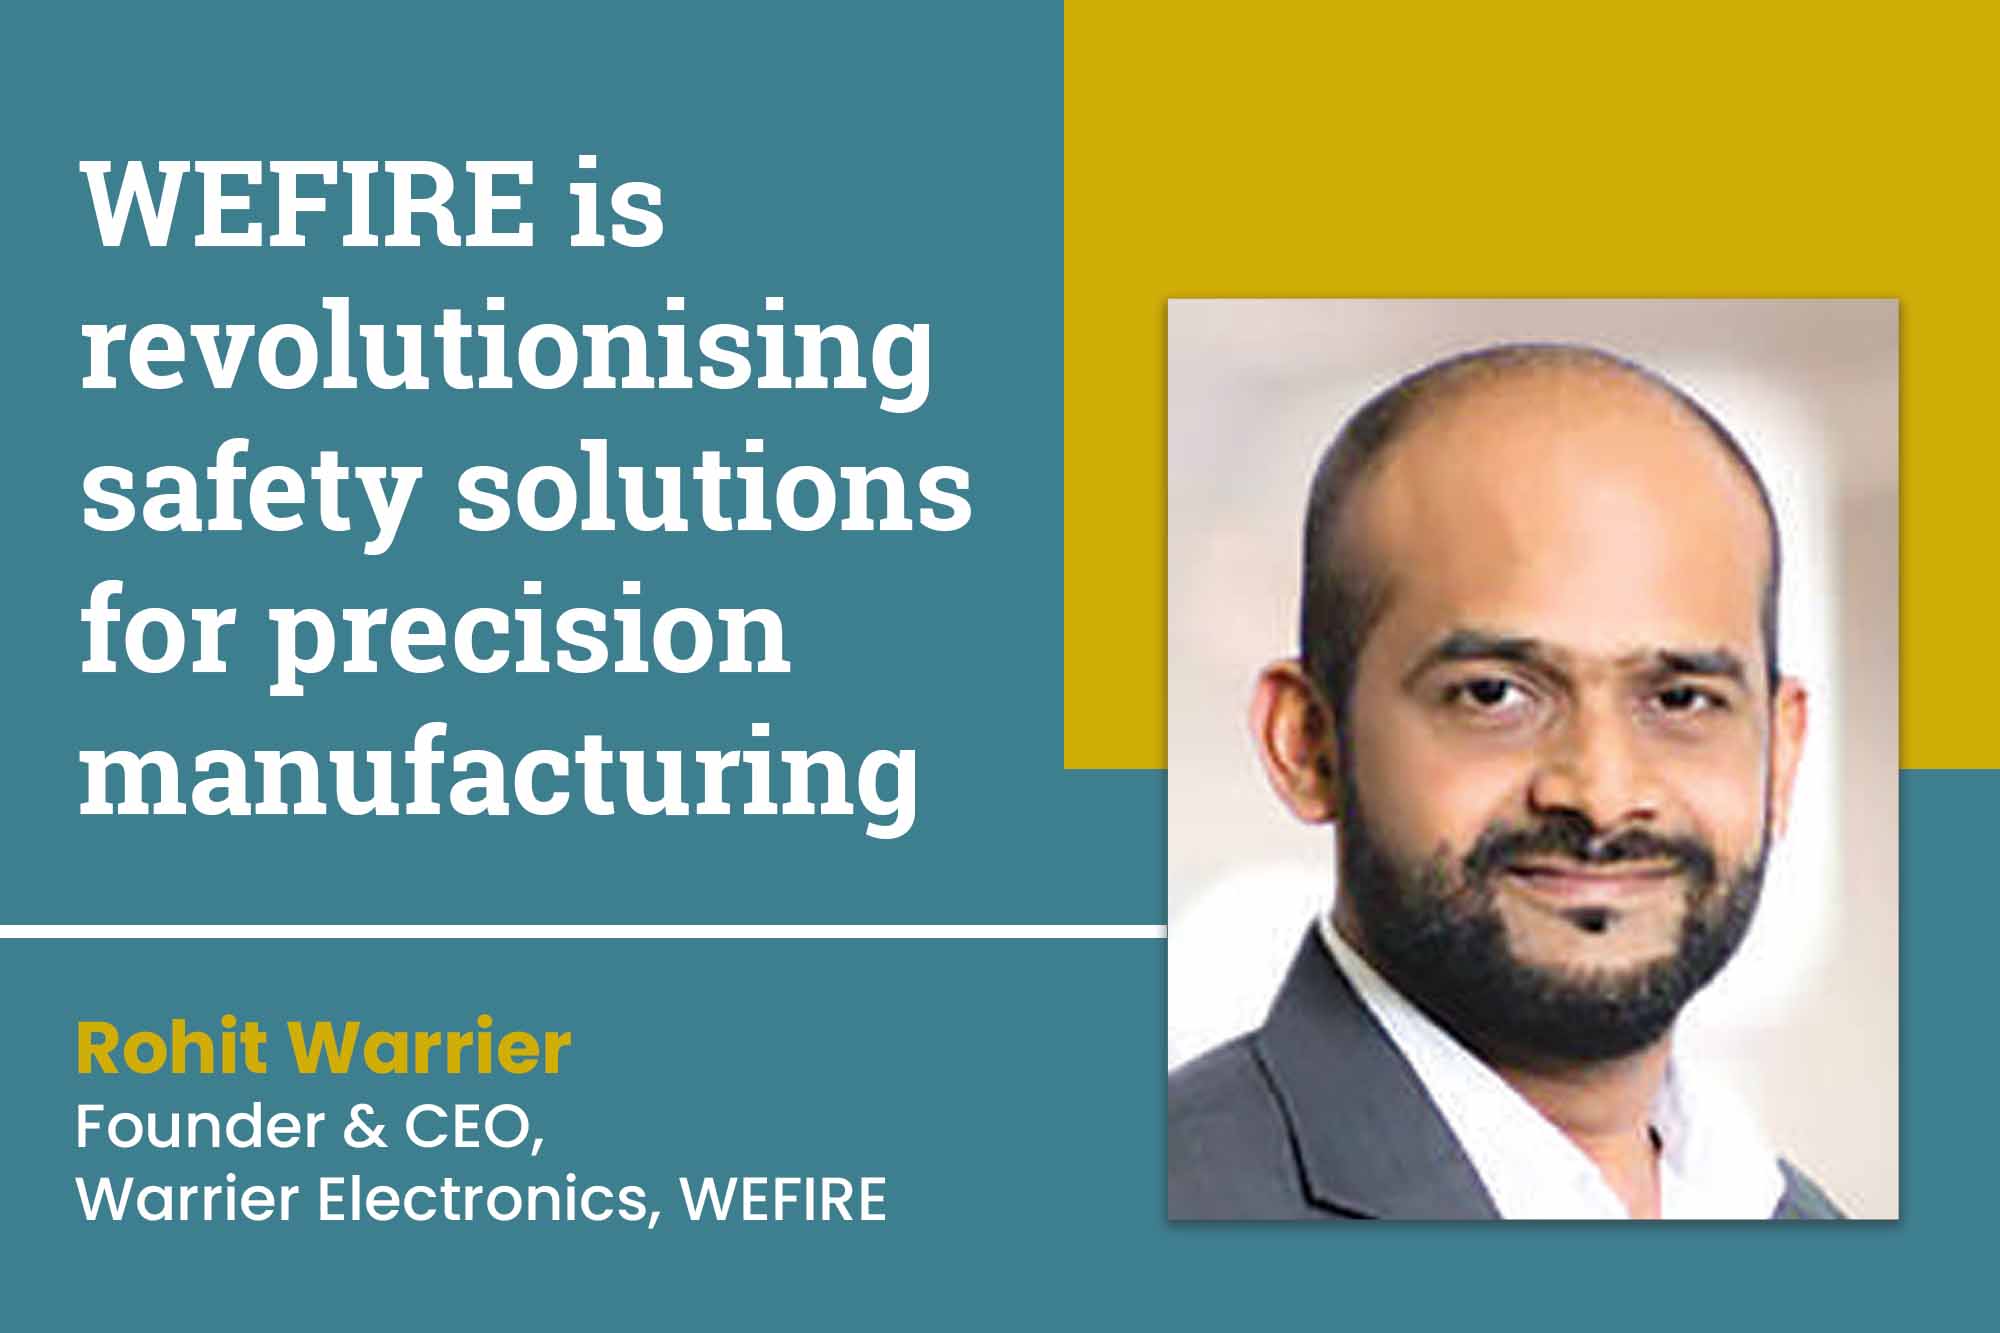 WEFIRE is revolutionising safety solutions for precision manufacturing